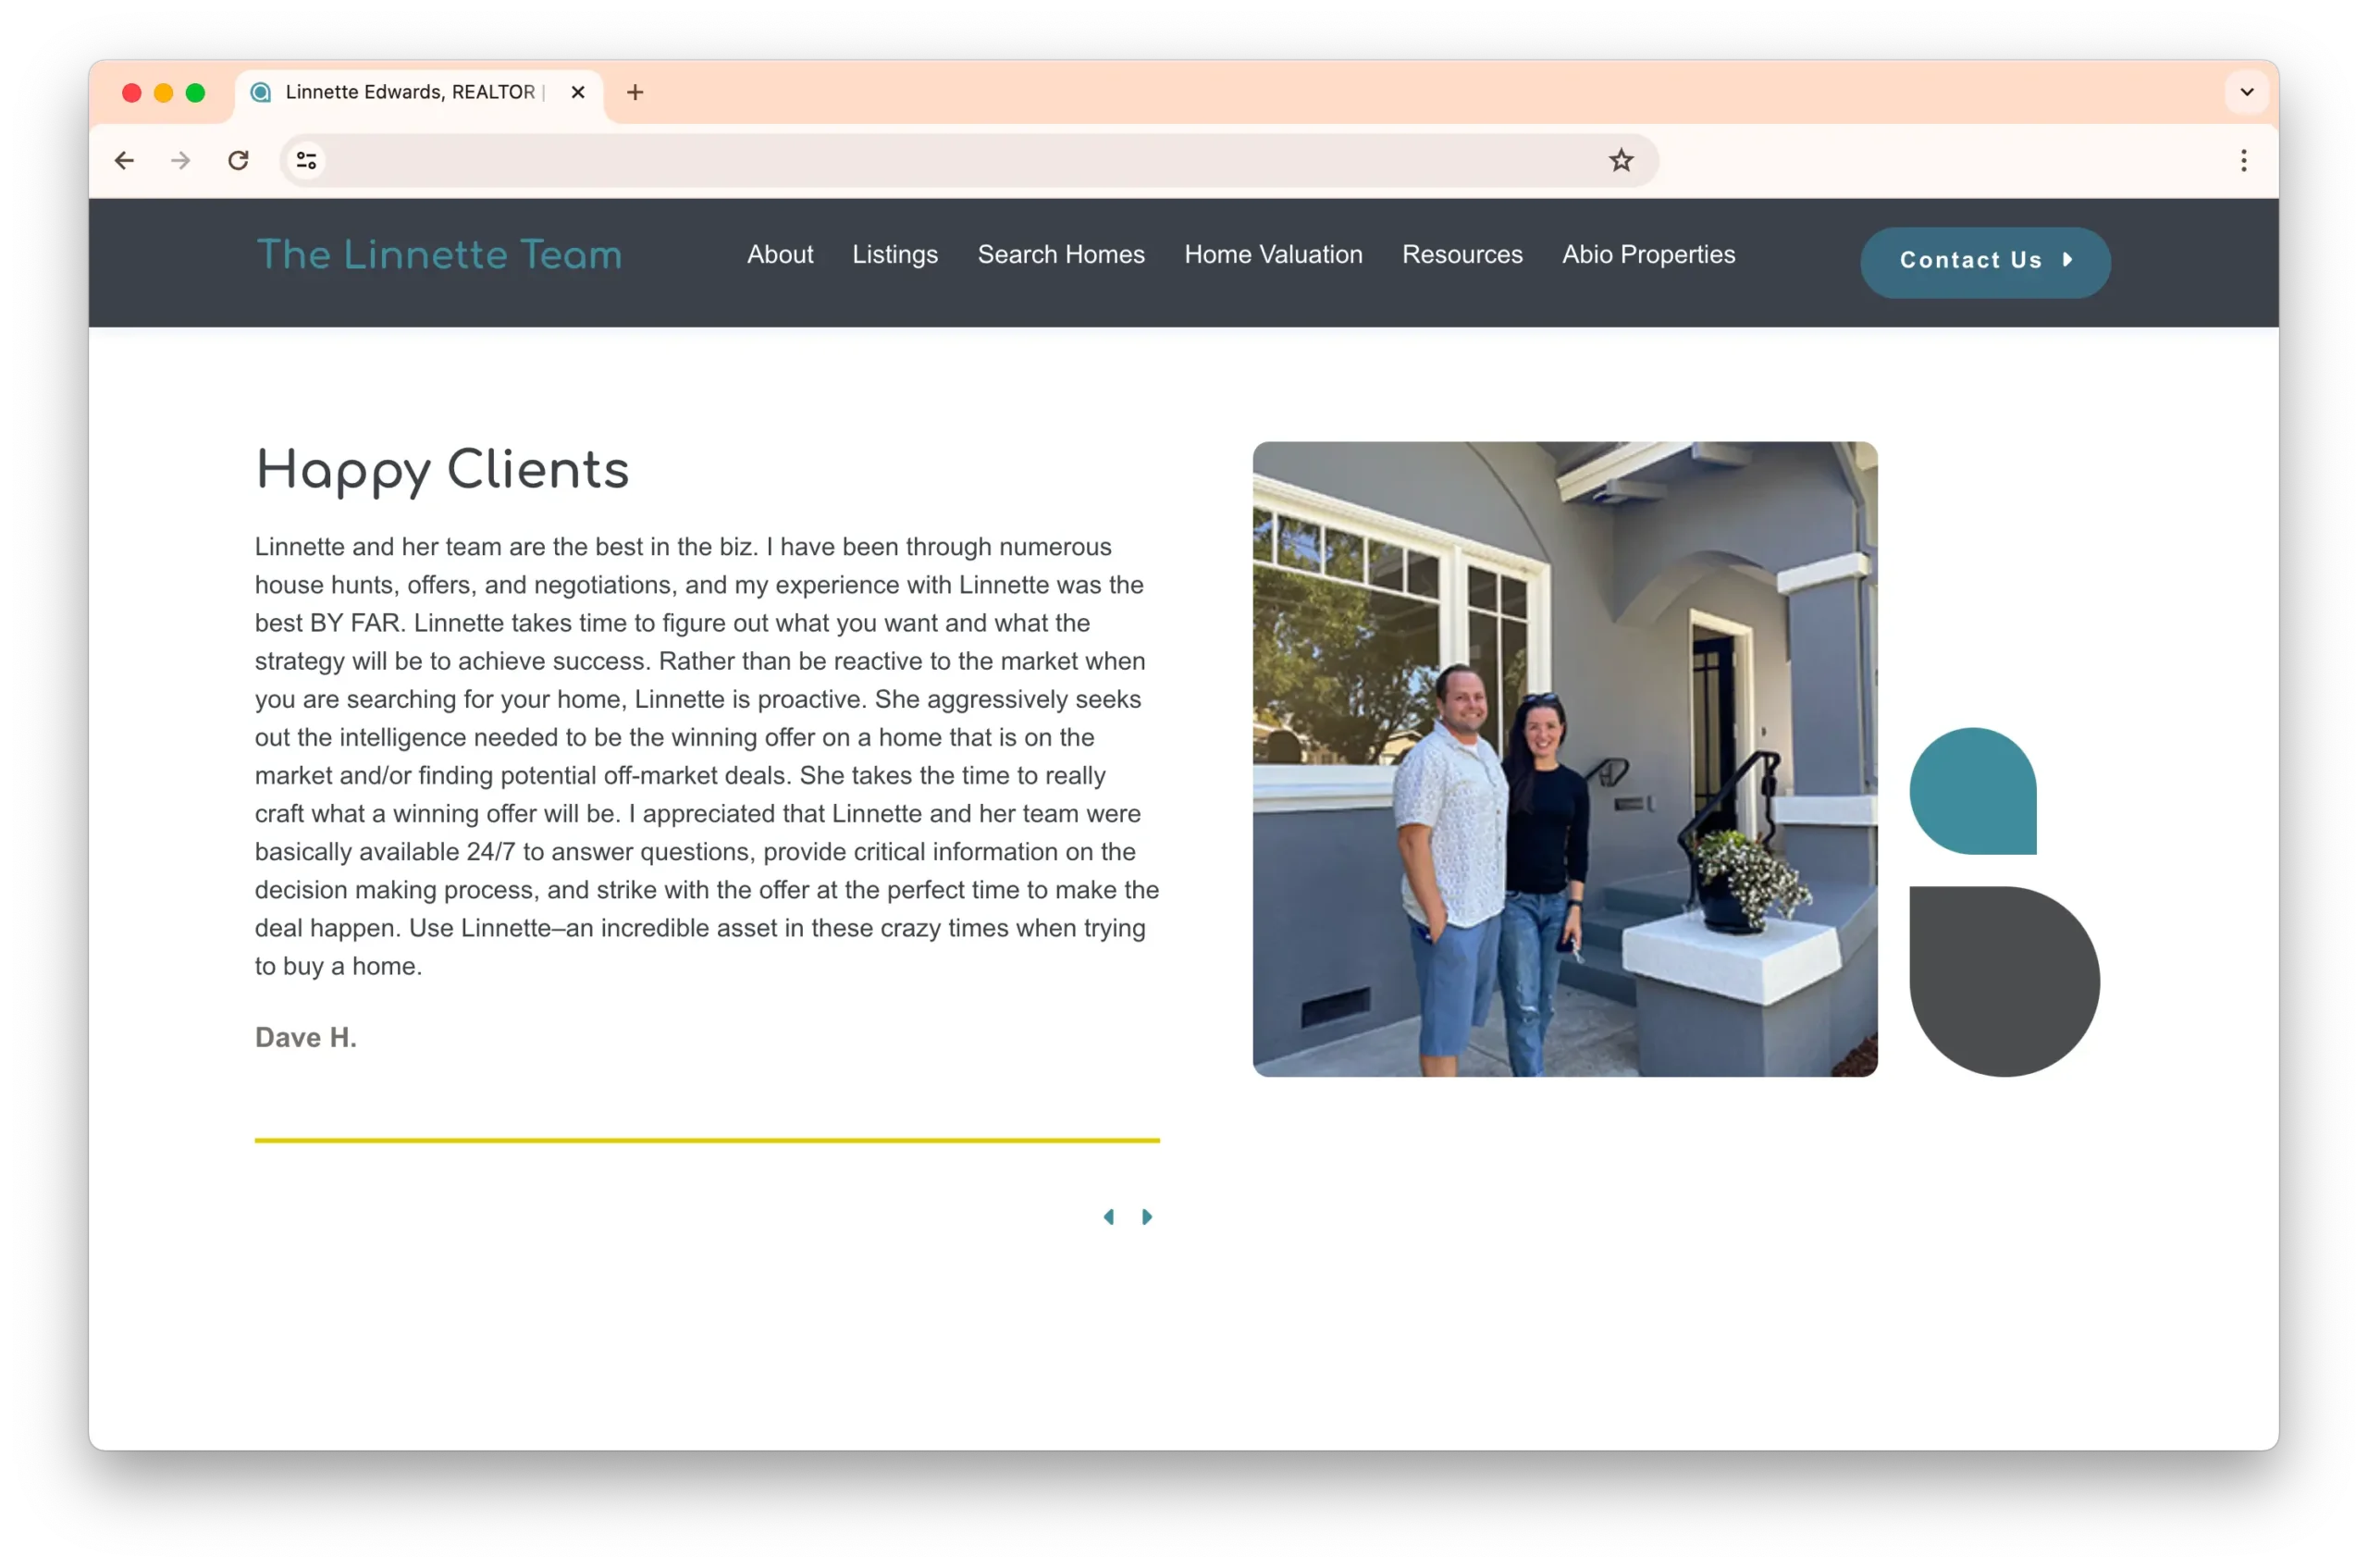 A webpage for The Linnette Team showcasing a testimonial from a satisfied client named Dave H. Next to the text, there is a photo of a couple standing with Linnette in front of a modern house.